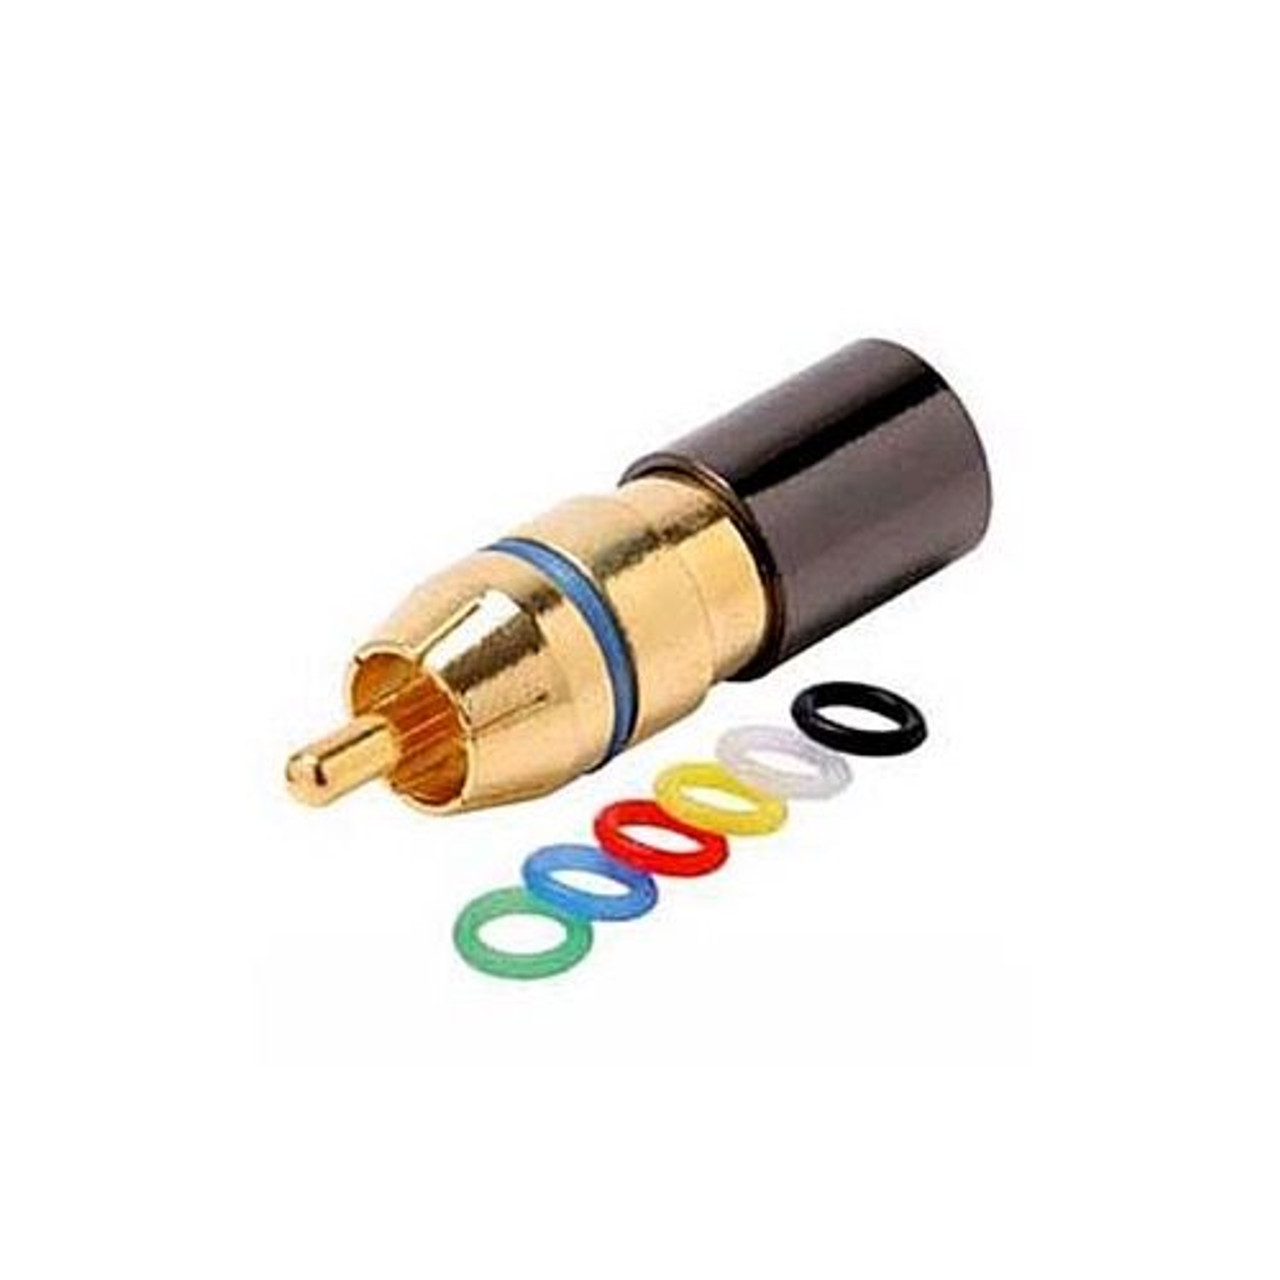 Eagle RCA Compression Connector RG6 Quad Coaxial Cable Gold Plated Permaseal II 360 Degree Connect 6 Color Coded Bands RG-6 Female to RCA Male Plug Adapter, RF Digital Commercial Audio Video Component